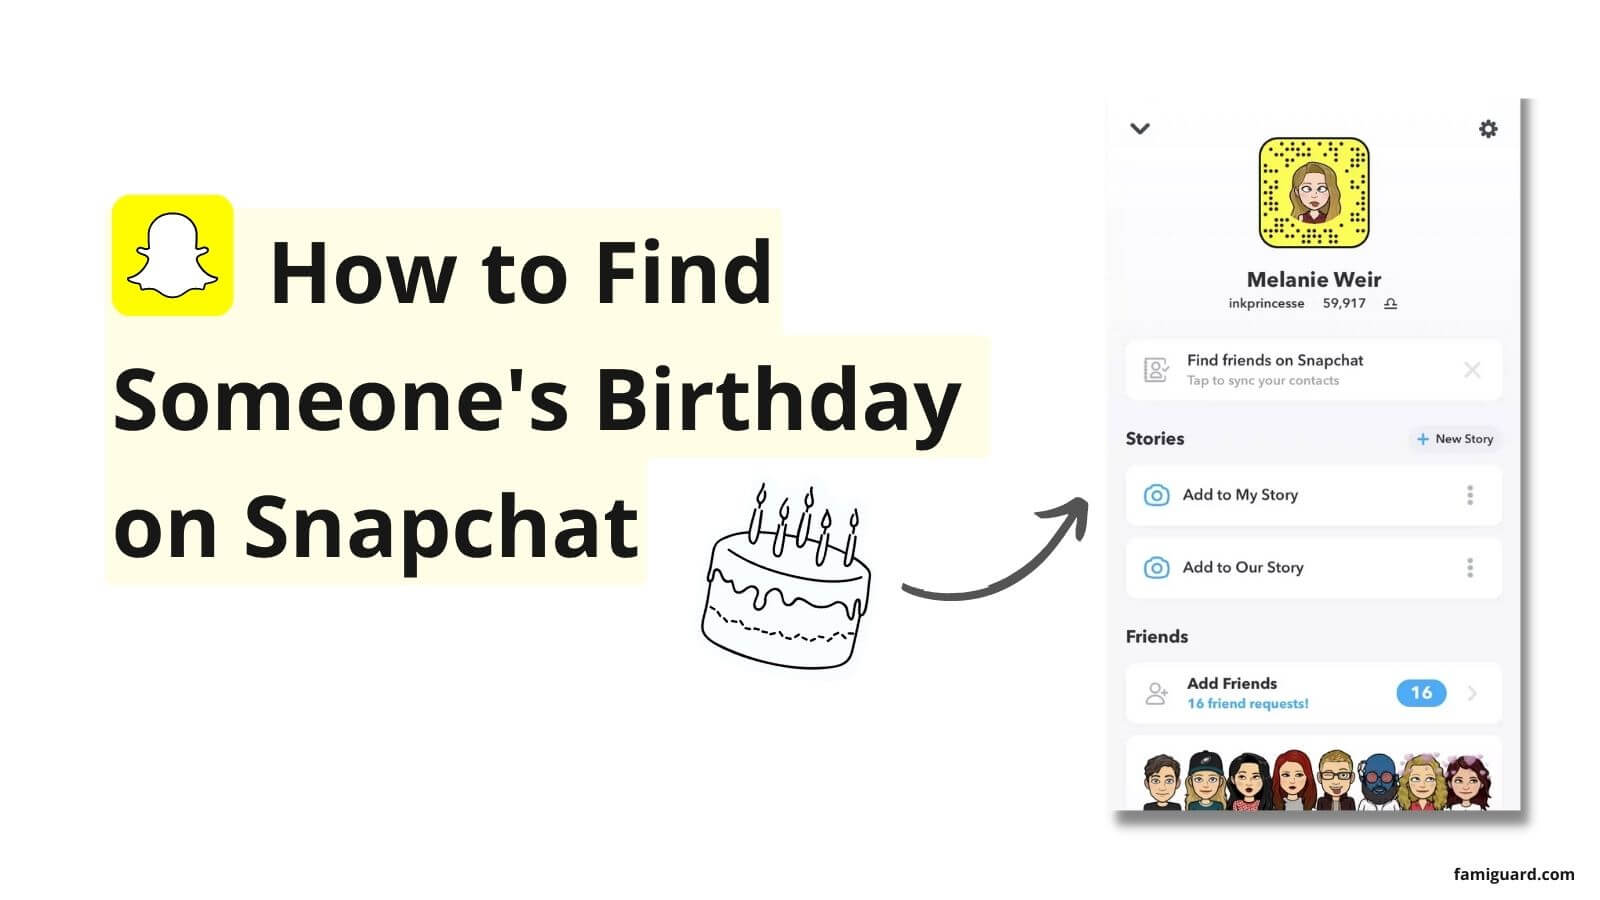 How to Find Someone's Birthday on Snapchat